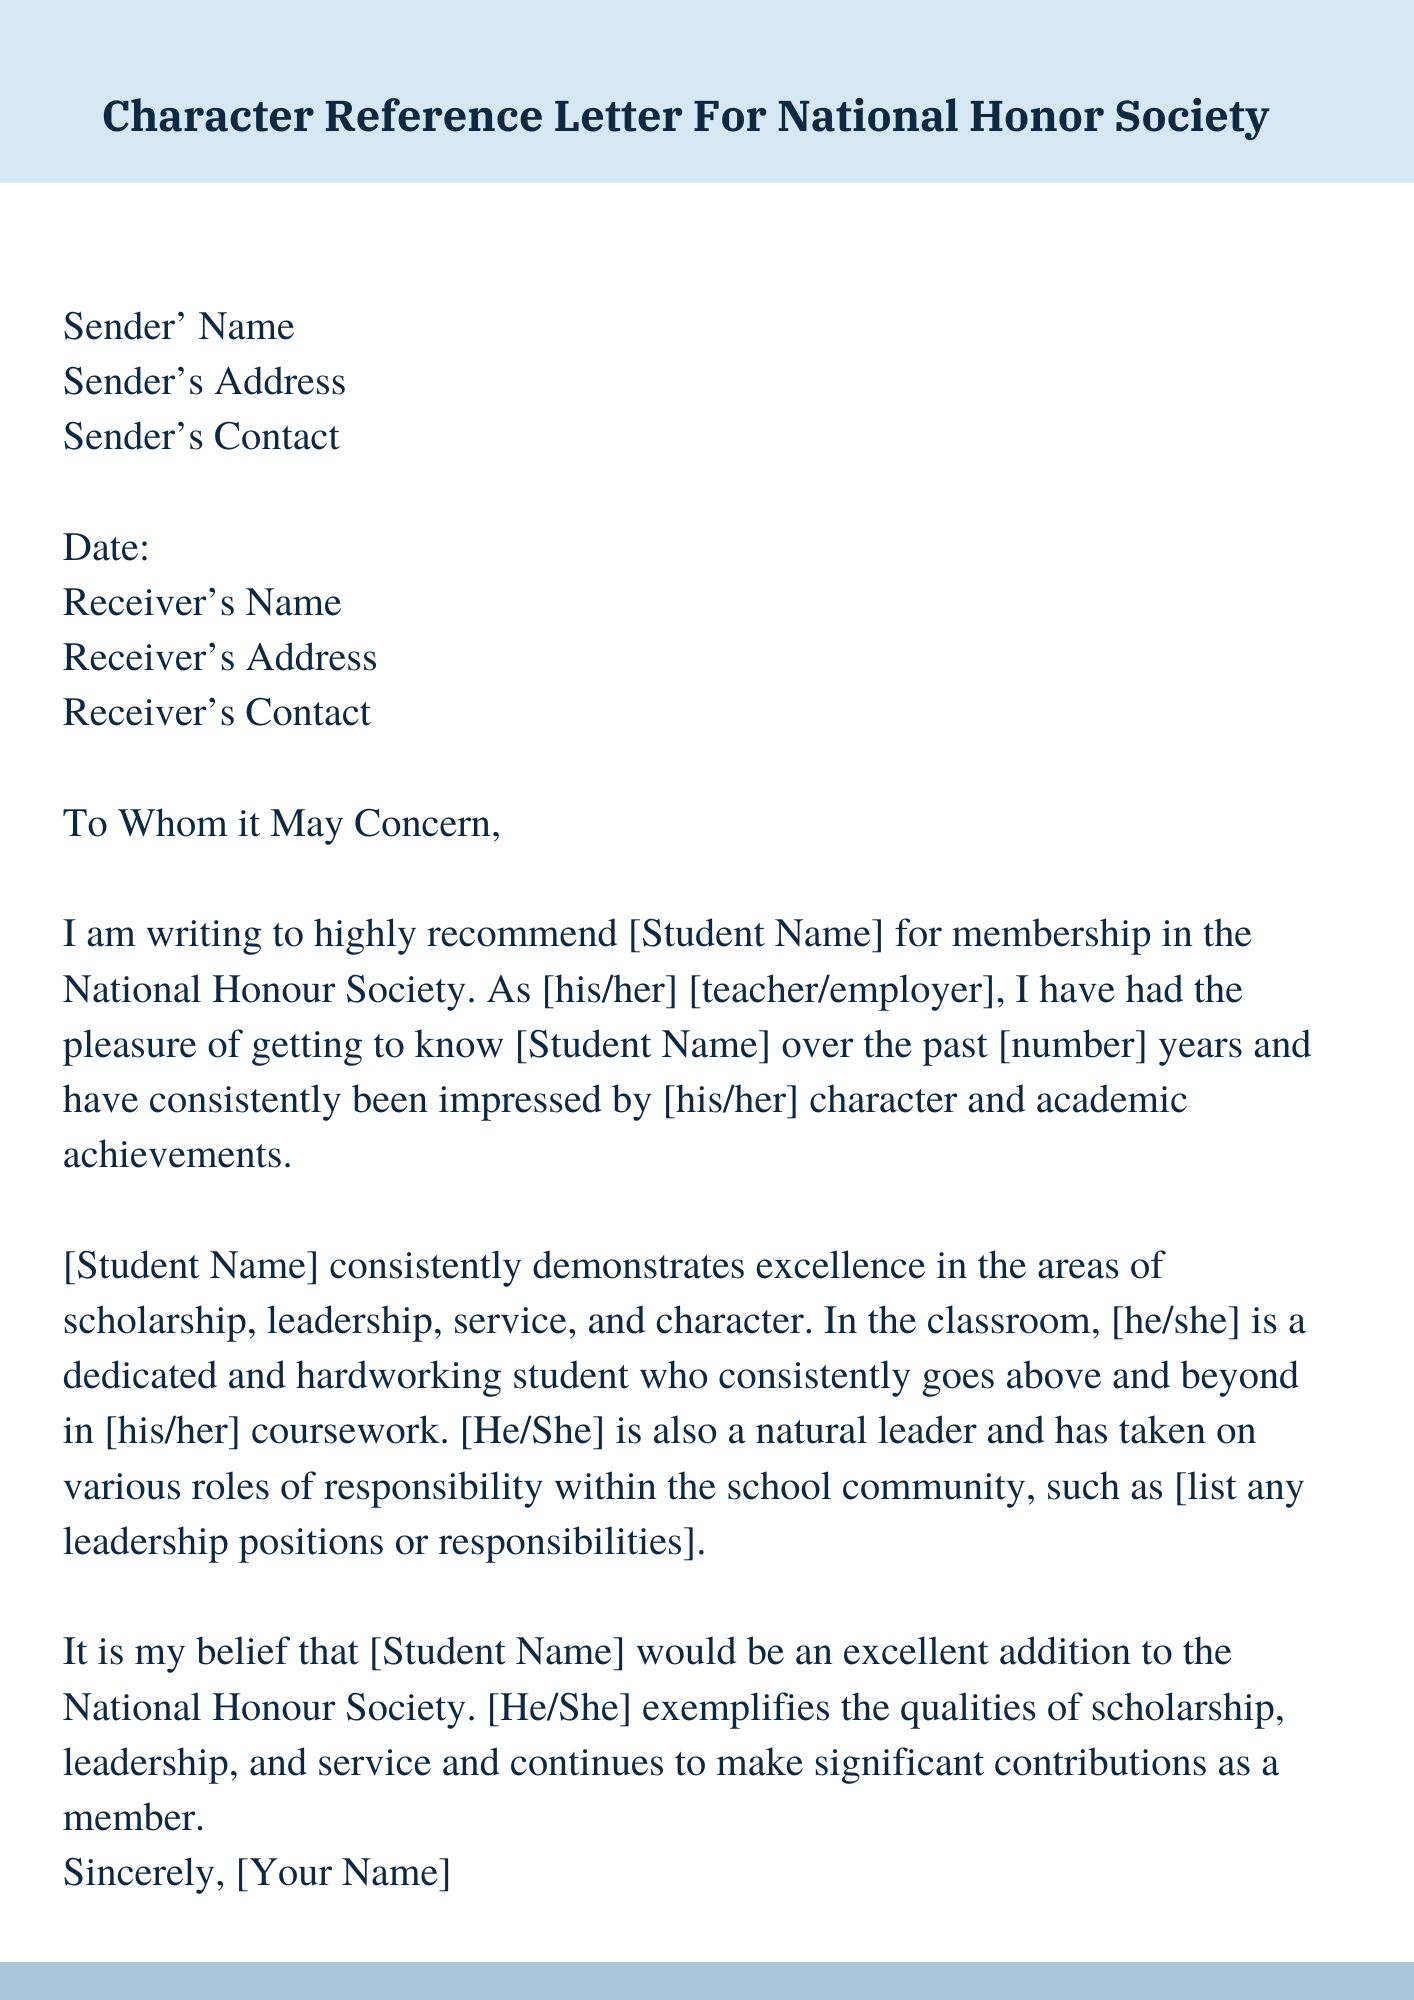 Character Reference Letter For National Honor Society 